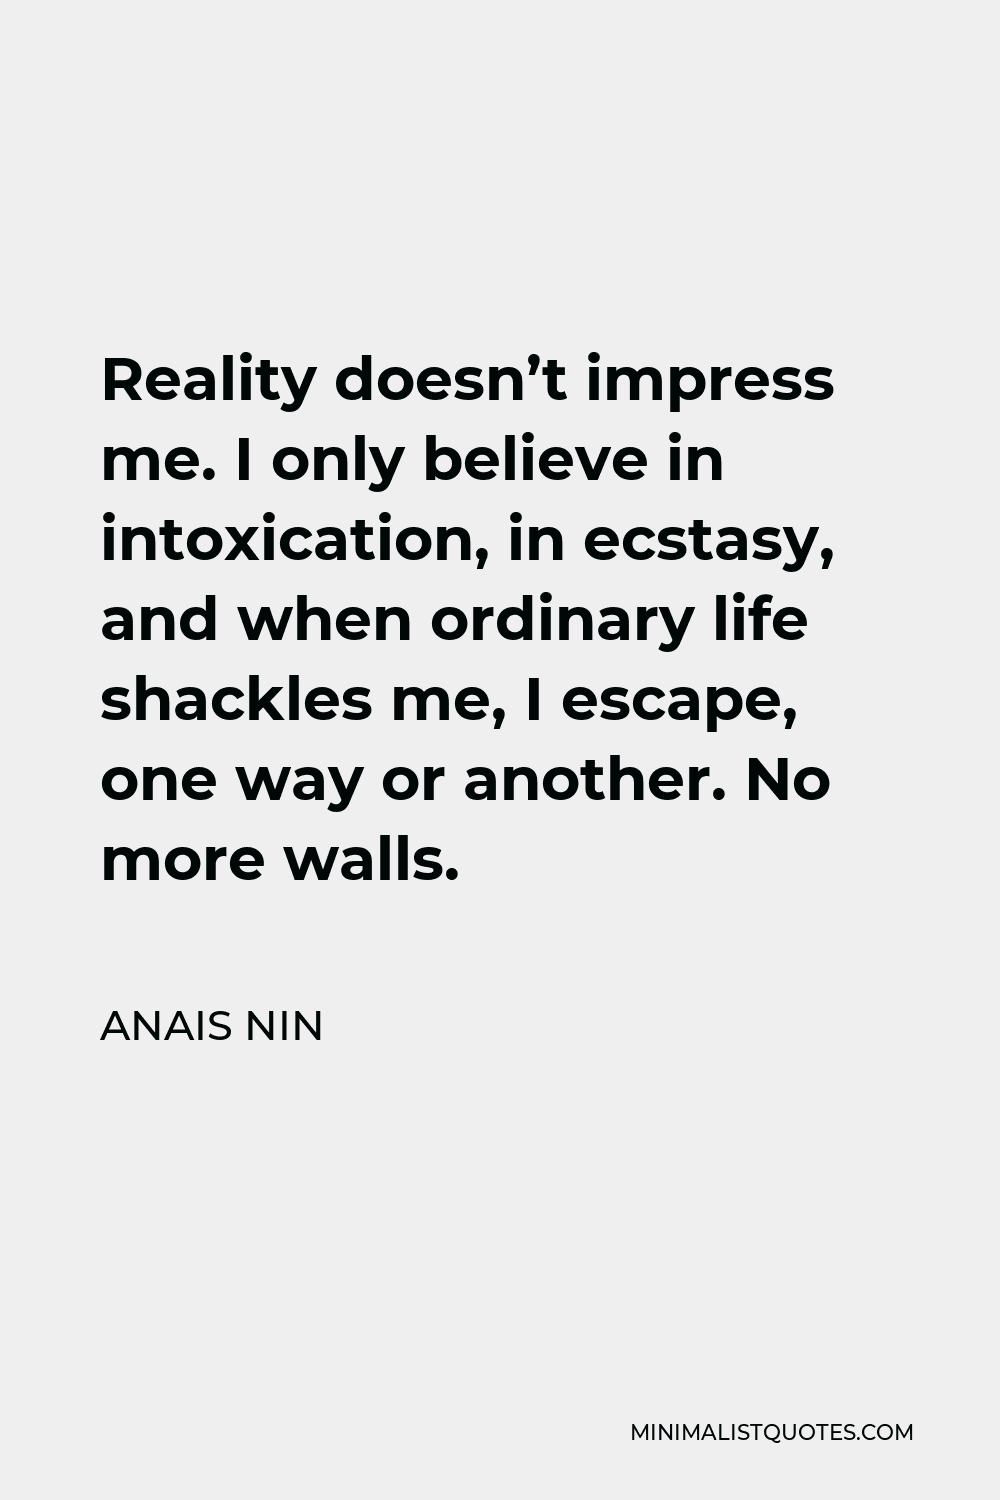 Anais Nin Quote - Reality doesn’t impress me. I only believe in intoxication, in ecstasy, and when ordinary life shackles me, I escape, one way or another. No more walls.